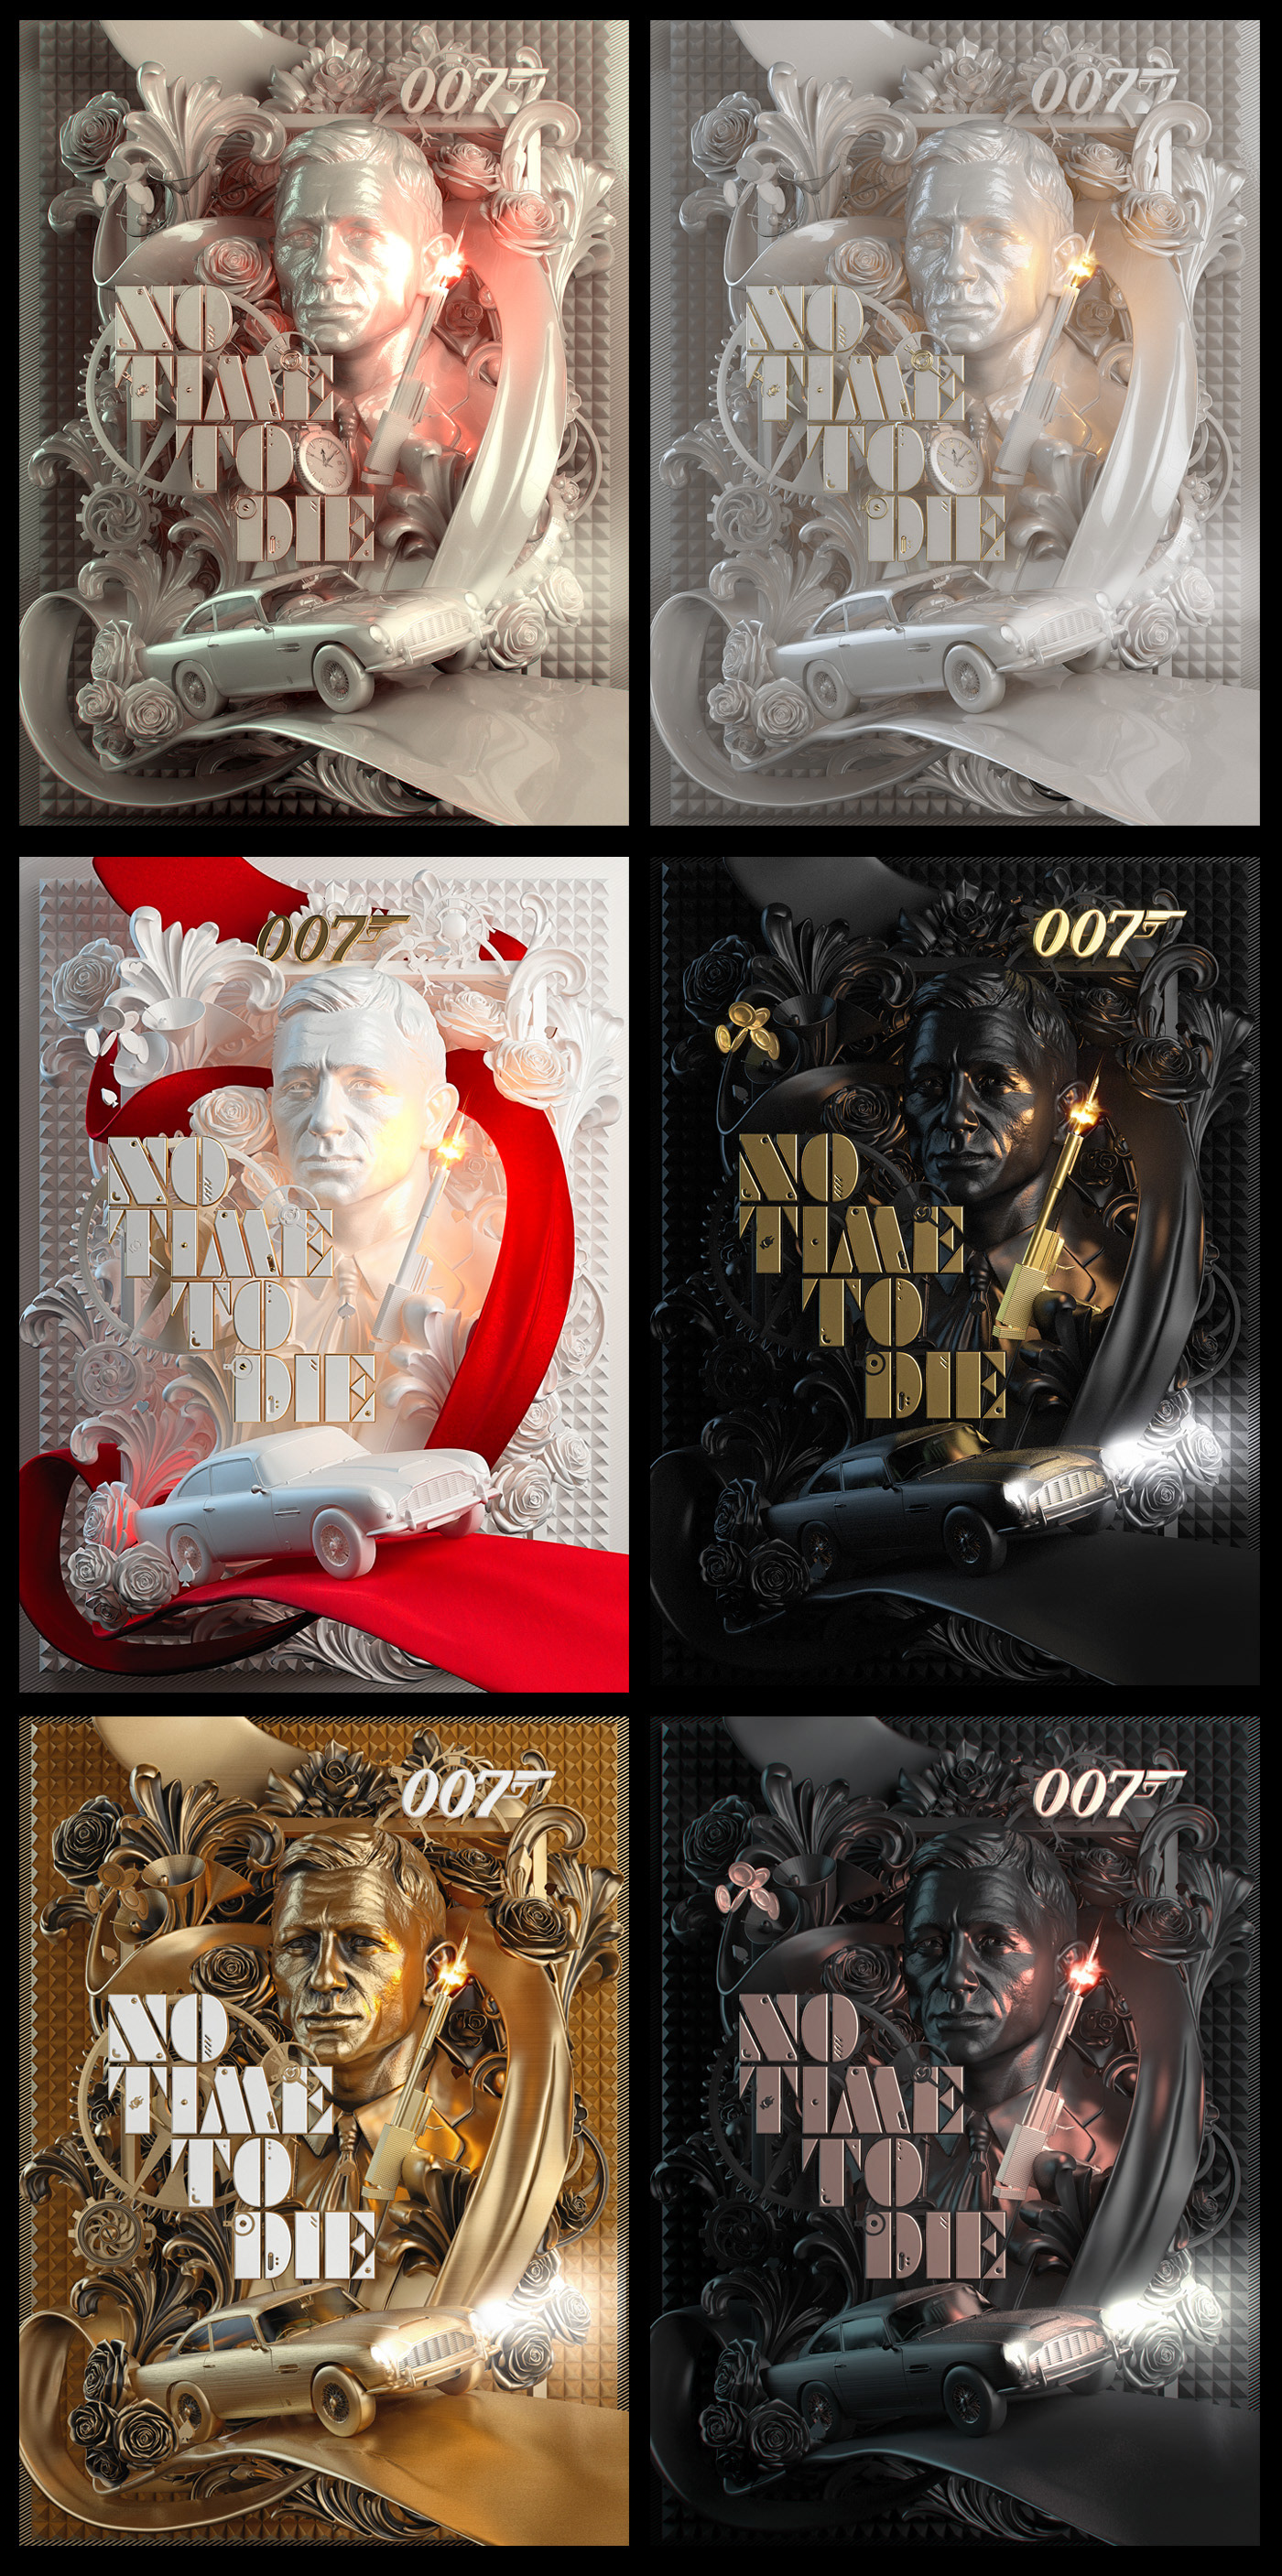 james bond posters Movies 3d Poster